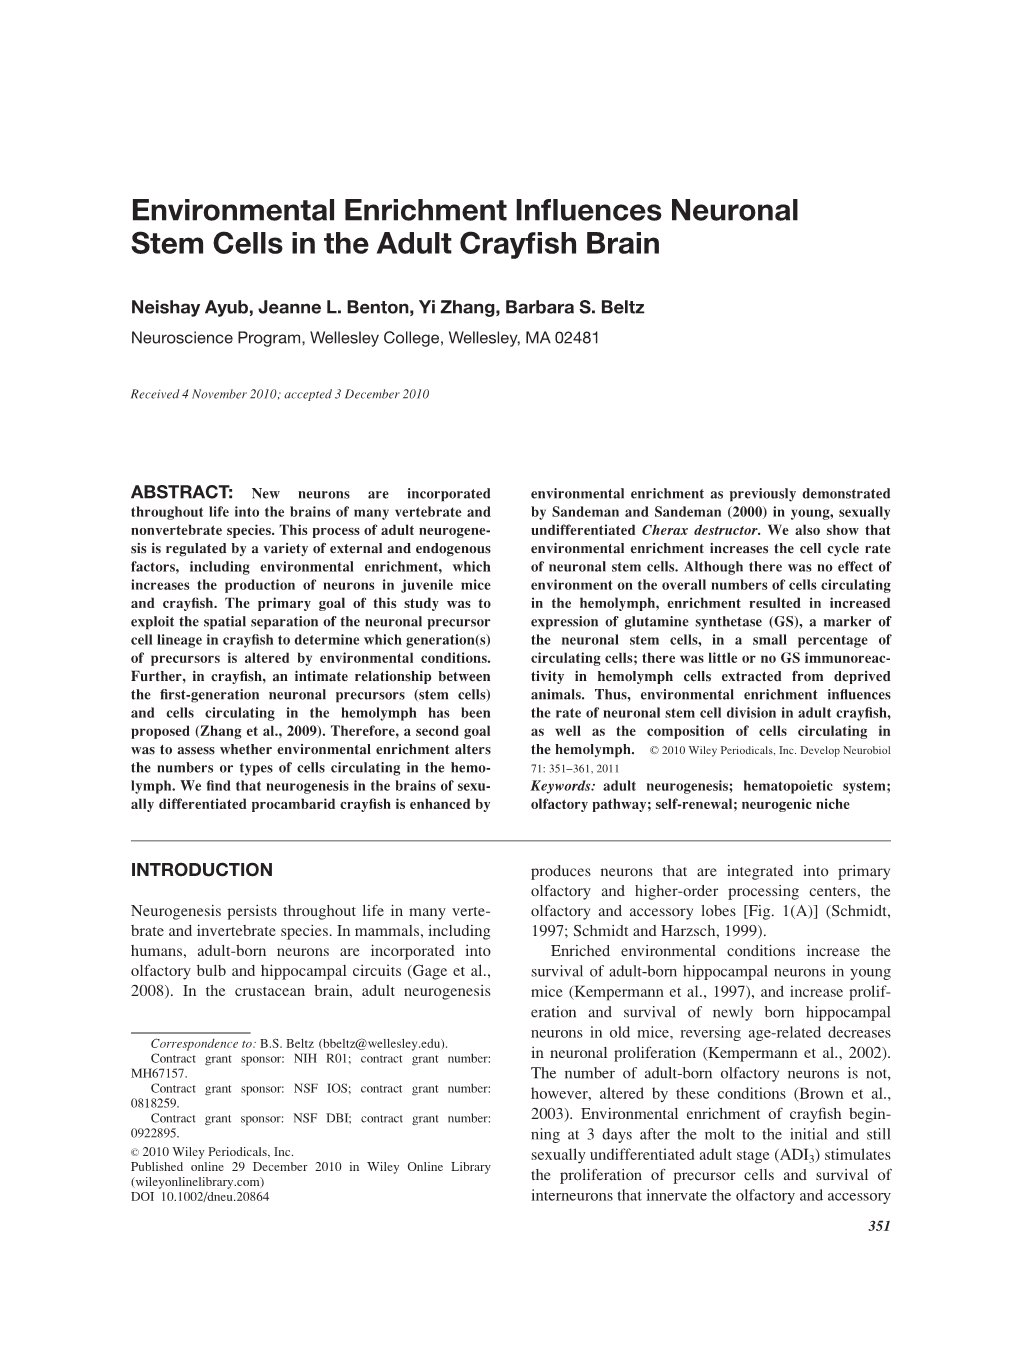 Environmental Enrichment Influences Neuronal Stem Cells in the Adult